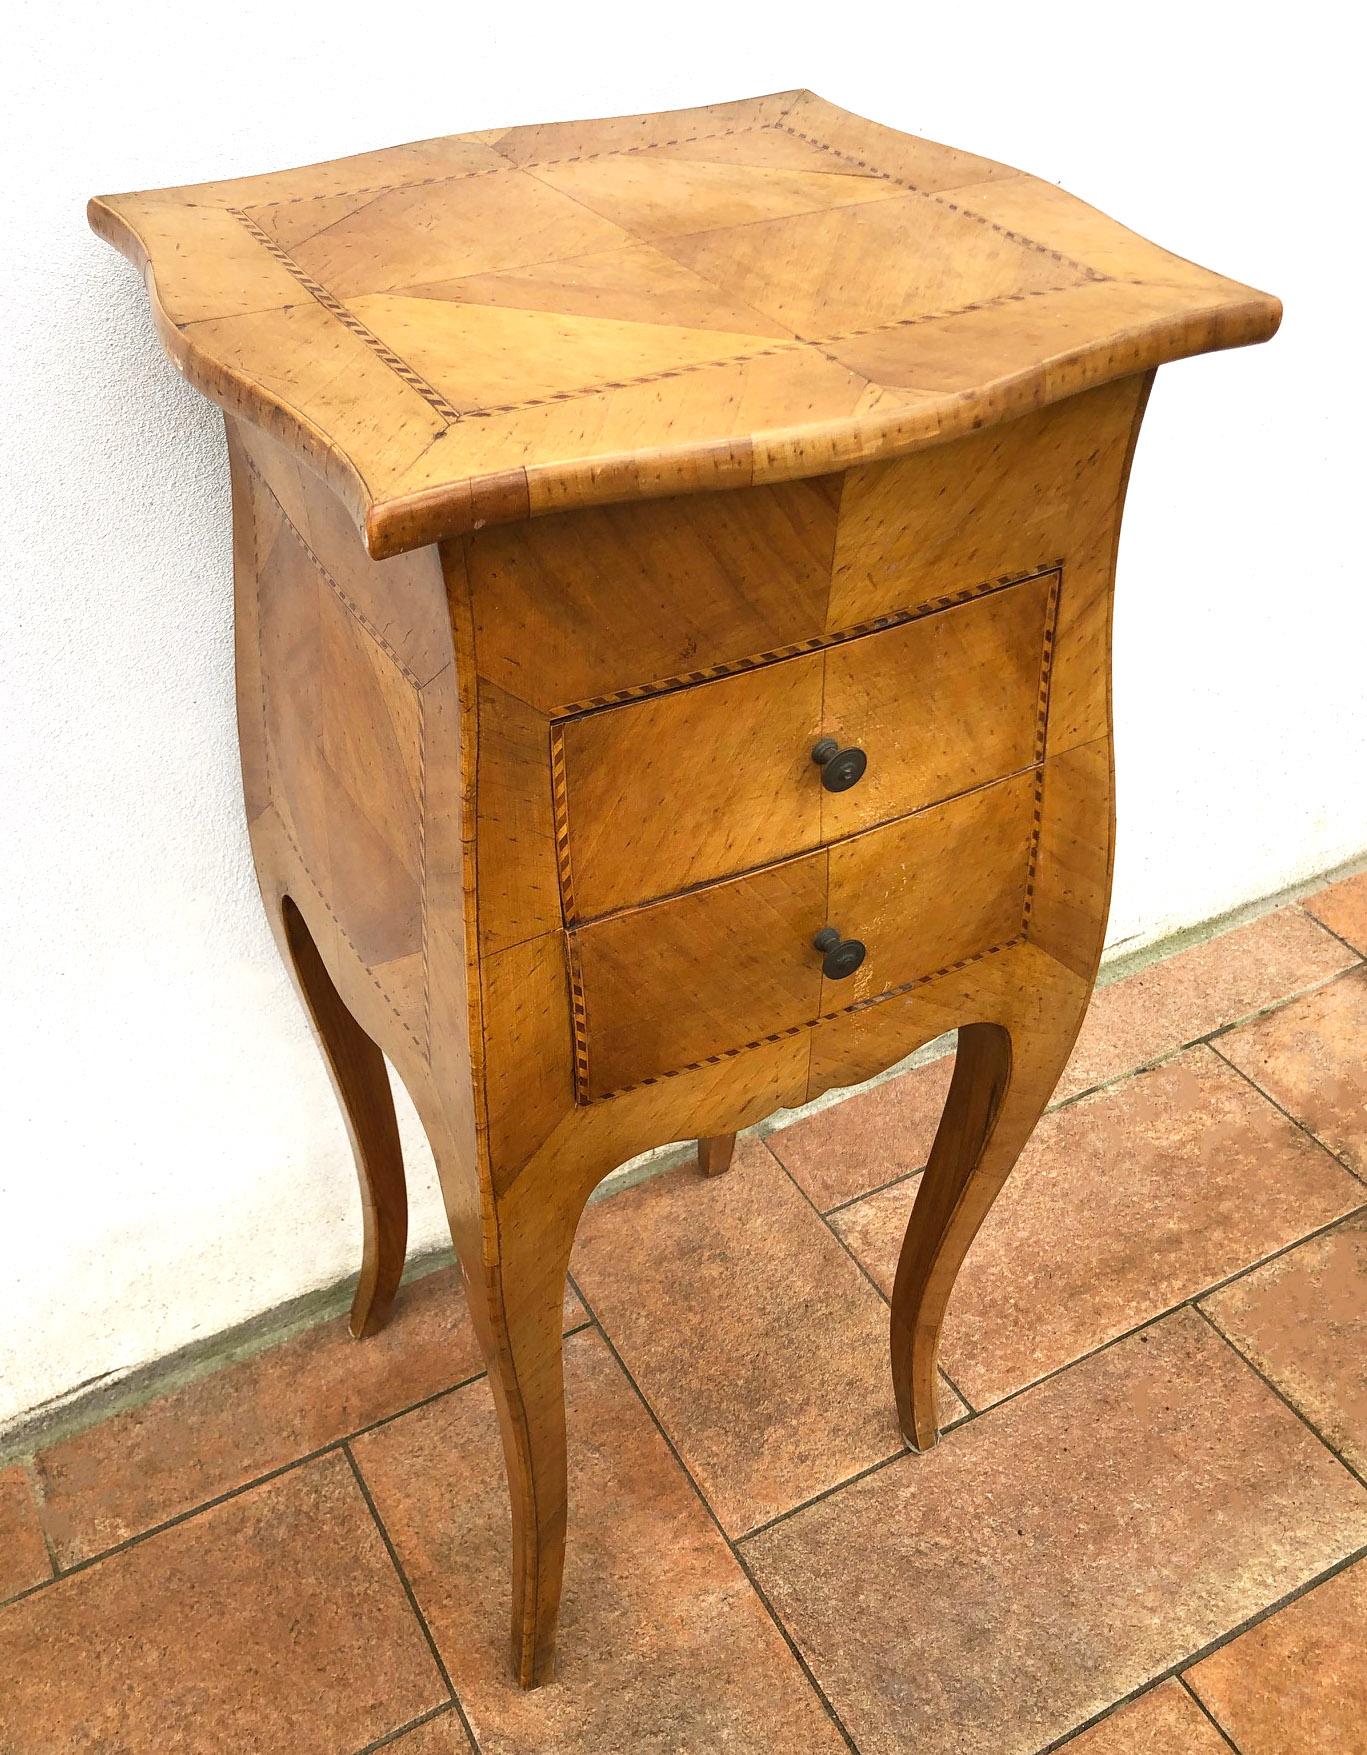 Walnut veneered nightstand, inlaid 1970s reproduction, with three drawers, geometric figures.
The transport quote for the USA and Canada is customized according to the destination, make the request with zip code and city.